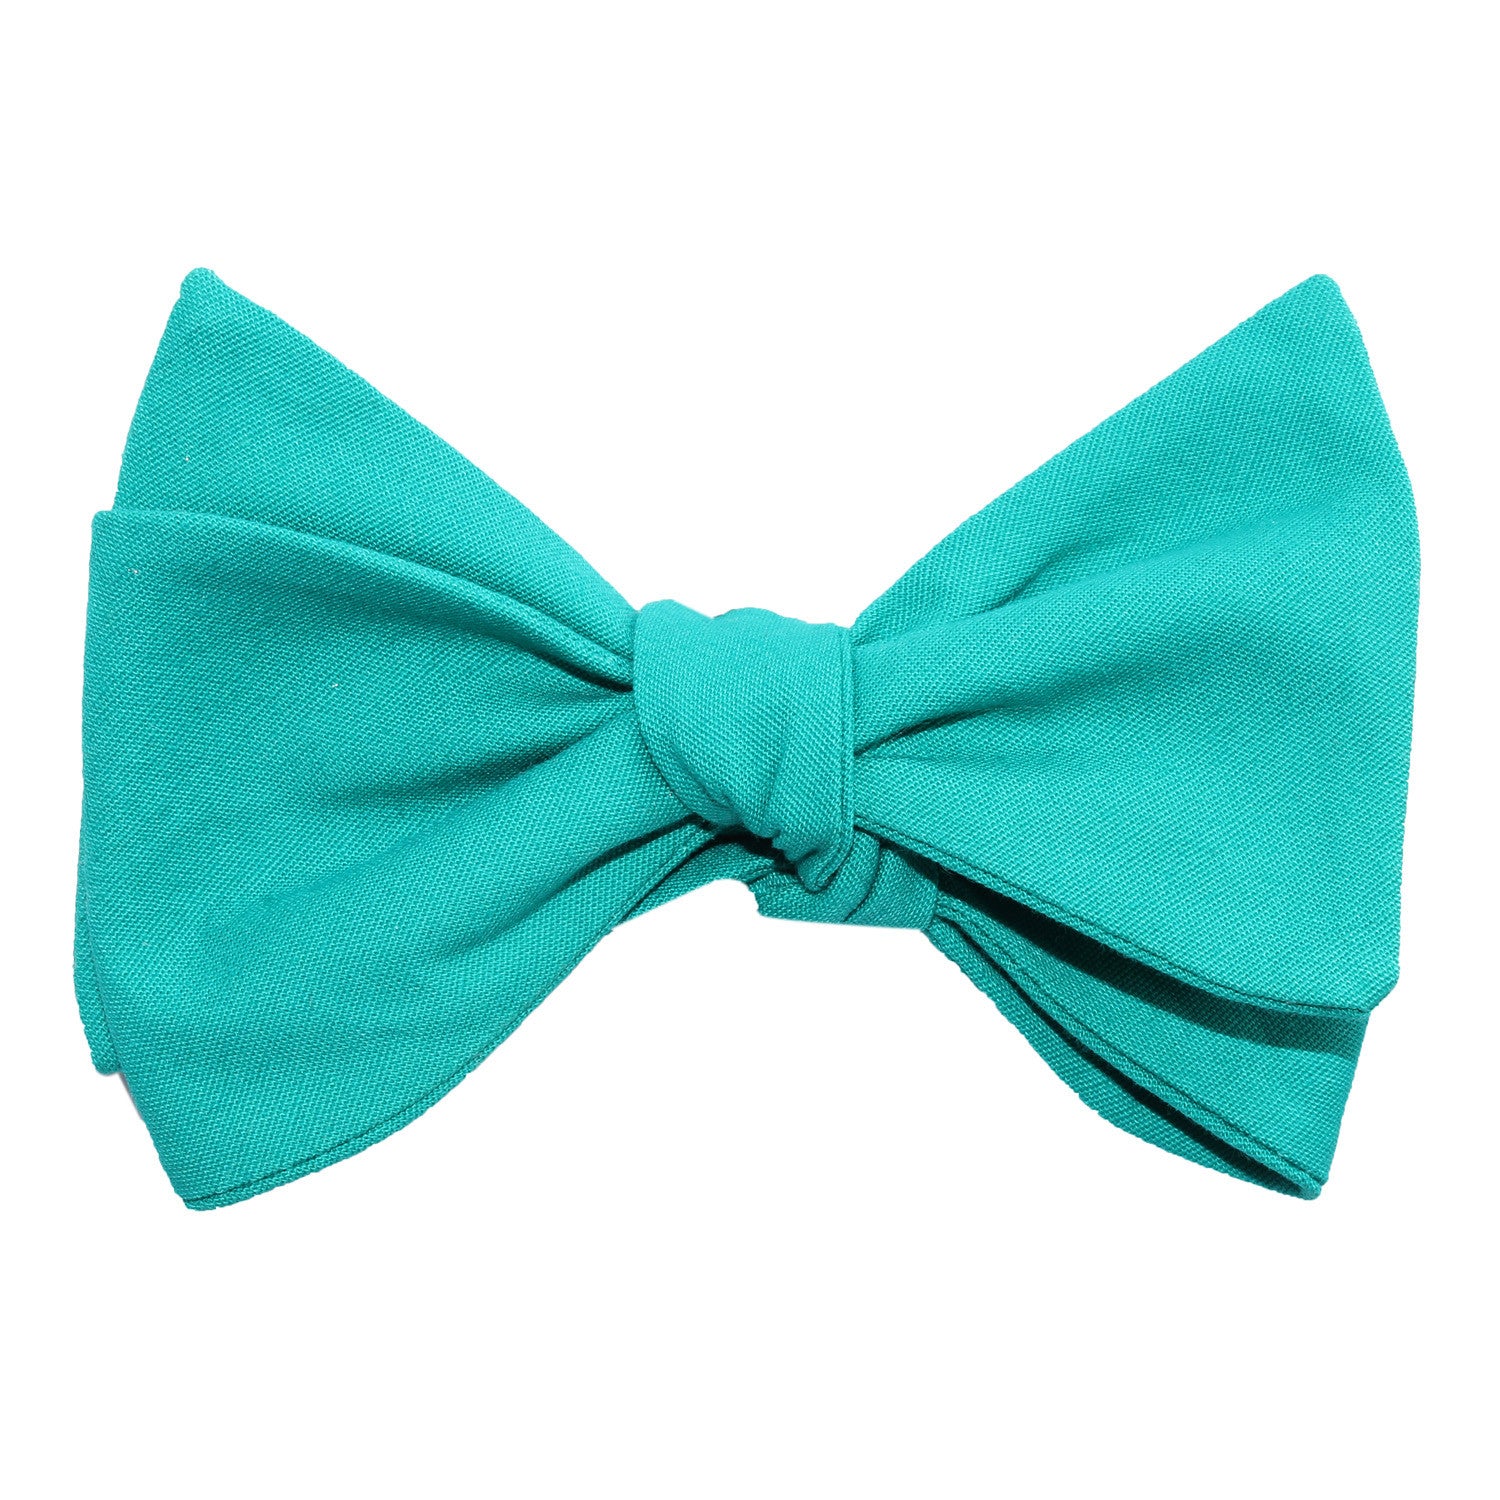 Green Teal Cotton Self Tie Bow Tie 2